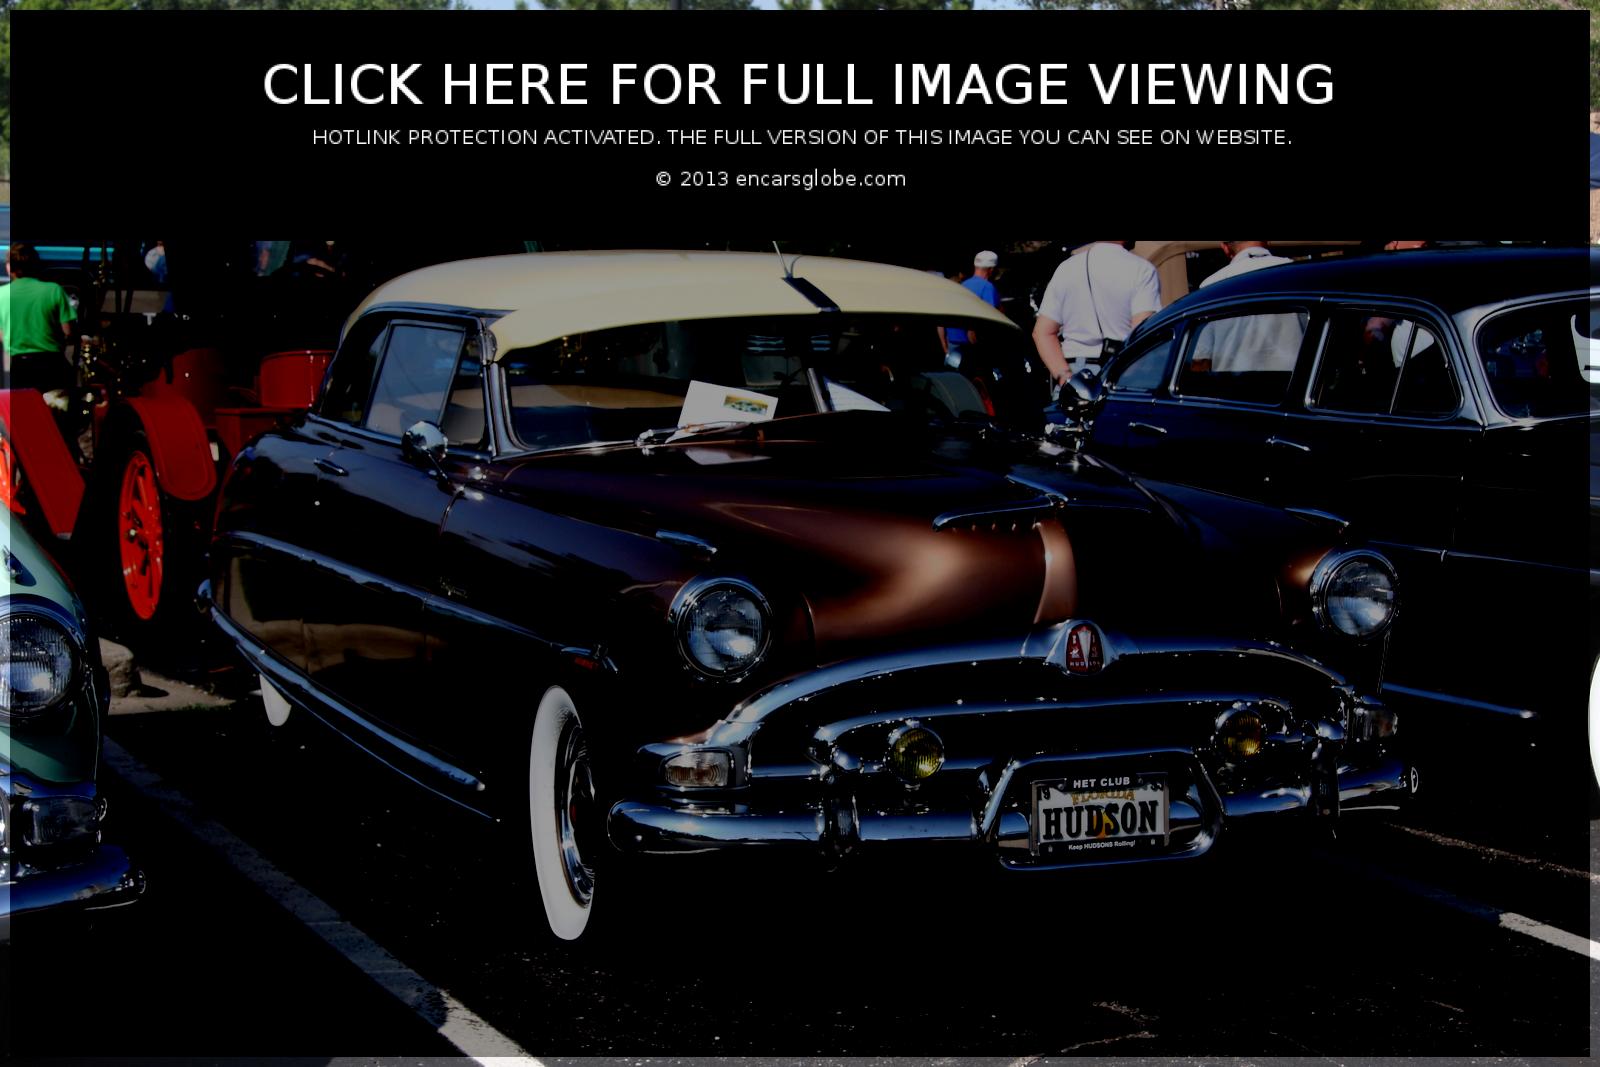 Hudson Hornet Hollywood 2dr HT Photo Gallery: Photo #06 out of 7 ...